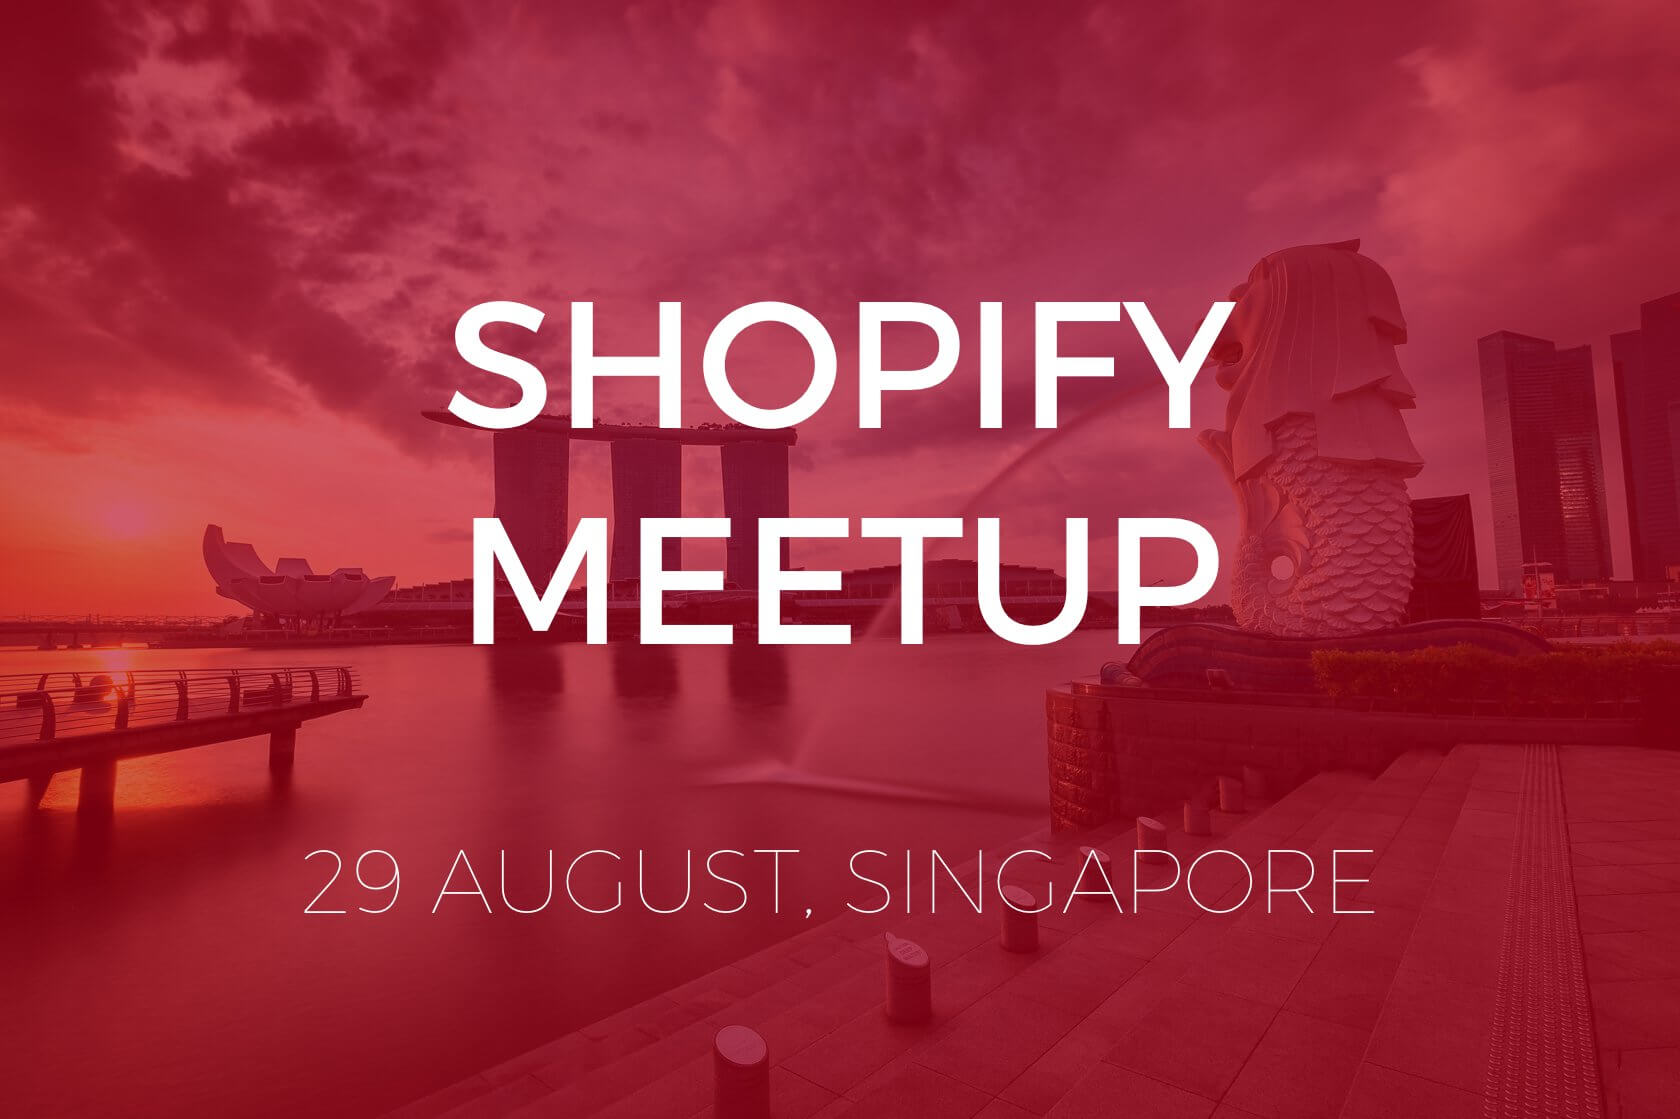 Shopify Meetup Singapore on 29 August 2018